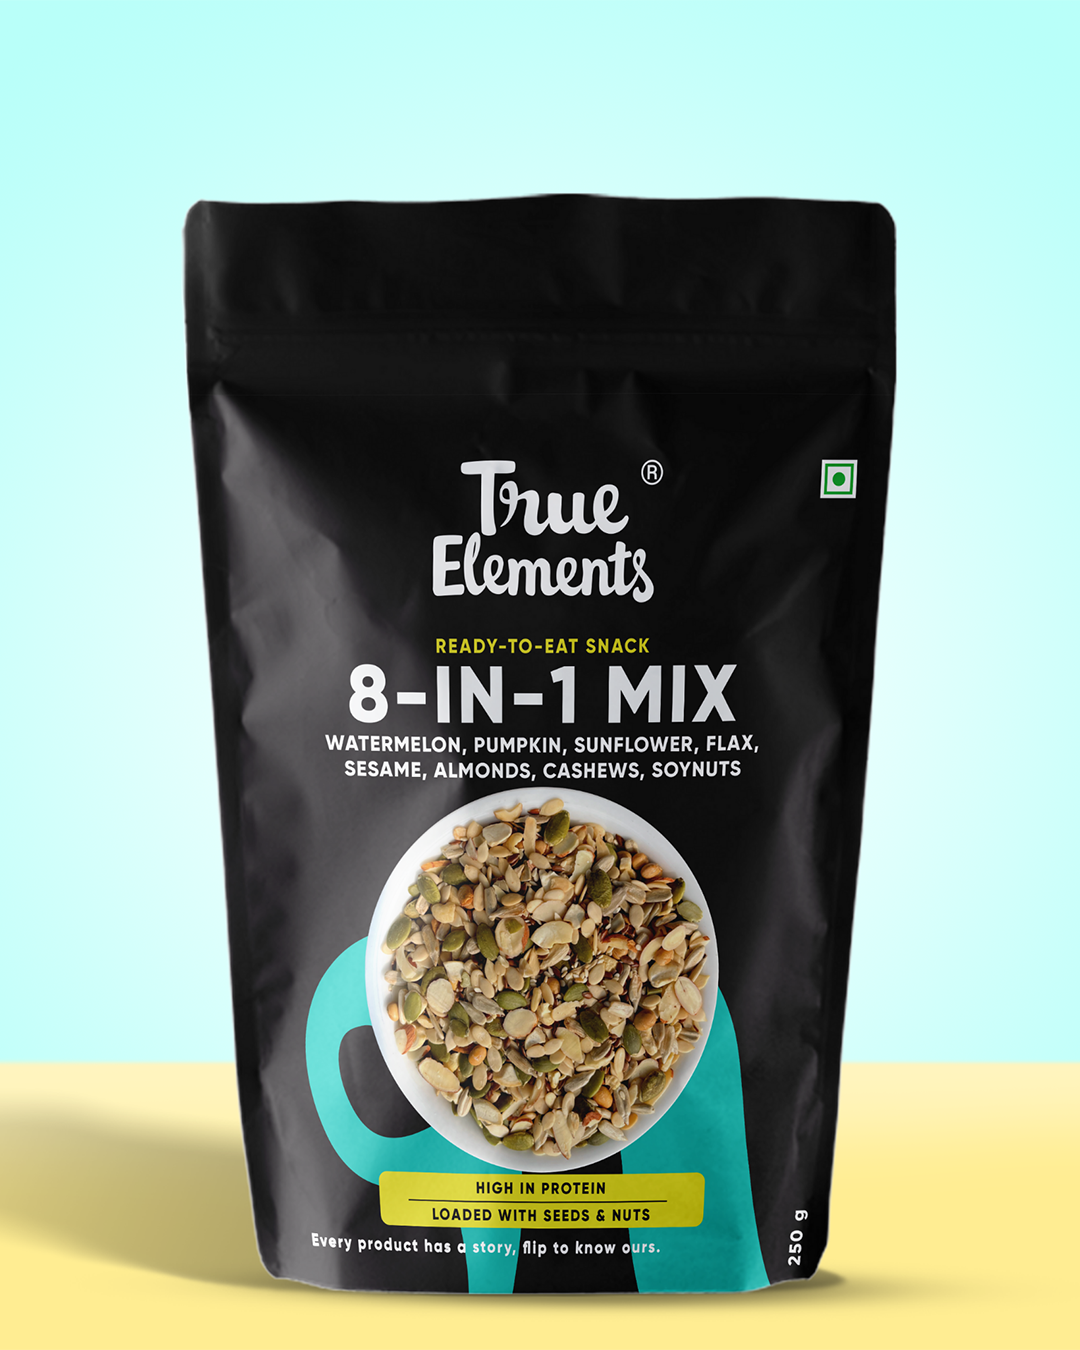 8 in 1 mix with watermelon, pumpkin, sunflower, flax, sesame, almonds, cashews & soynuts in 250g pouch.